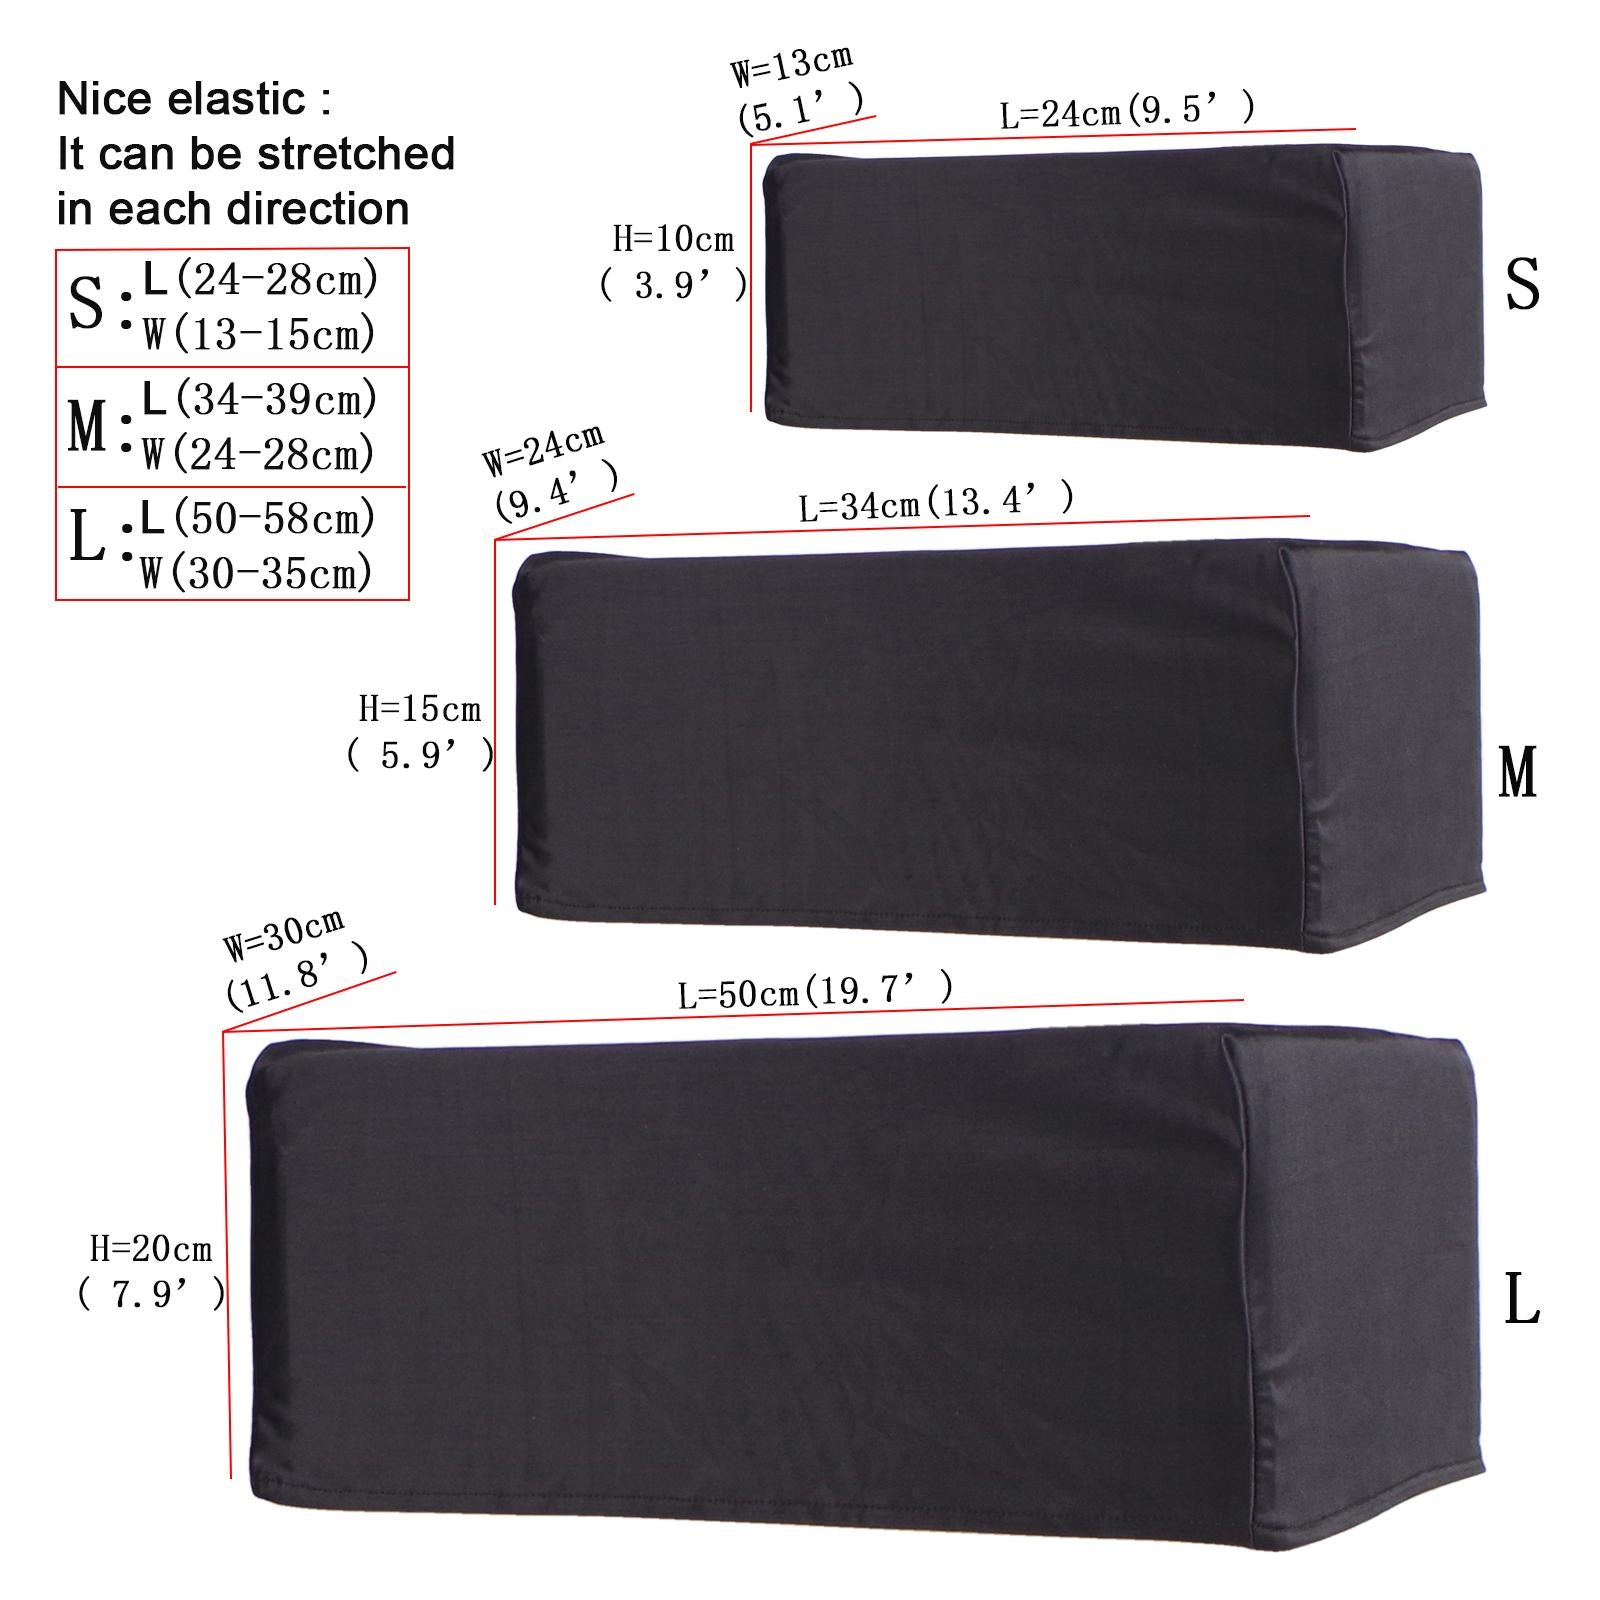 Outdoor Speaker Covers Stretched Waterproof UV Resistant for Home Audio L 50x30x20cm